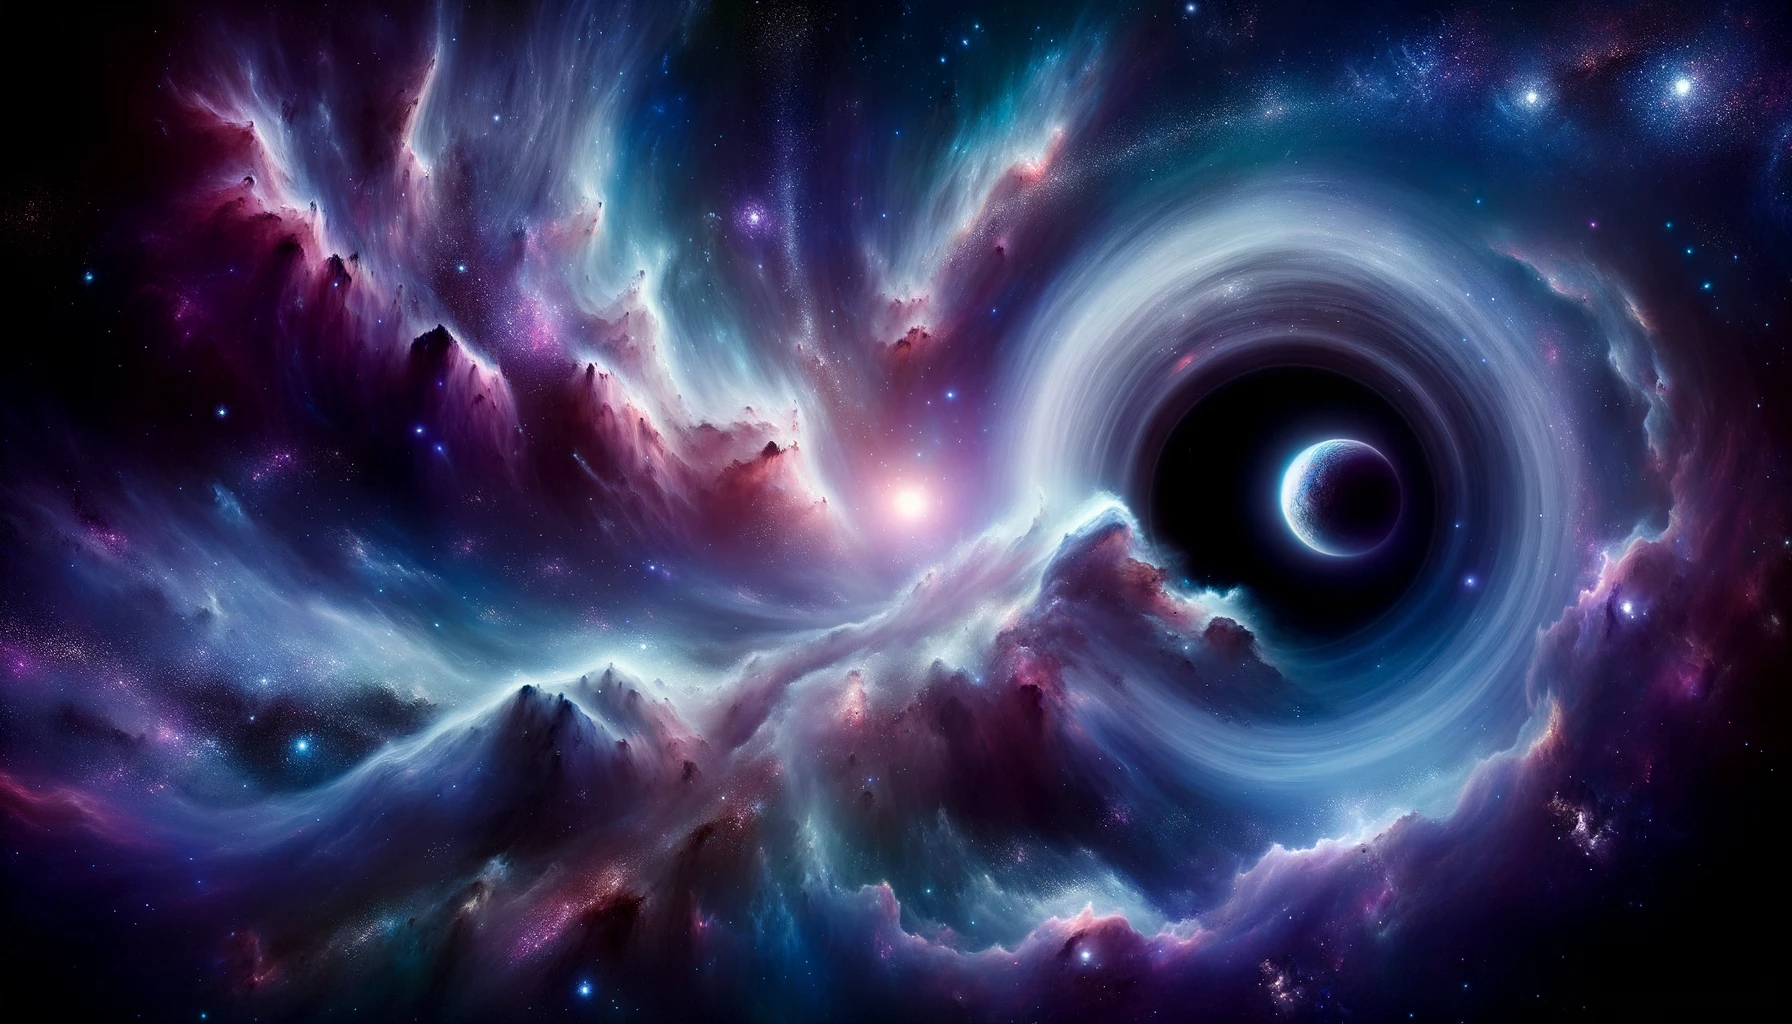 Artistic depiction of the vastness of space, where a galaxy unveils its secrets. Nebulae, their forms fluid and ever-changing, shine in shades of violet and cerulean blue. These cosmic structures surround a central black hole, its size and power beyond comprehension. In this majestic setting, an alien planet, distinguishable by its shimmering rings, orbits, suggesting tales of extraterrestrial civilizations and cosmic adventures.